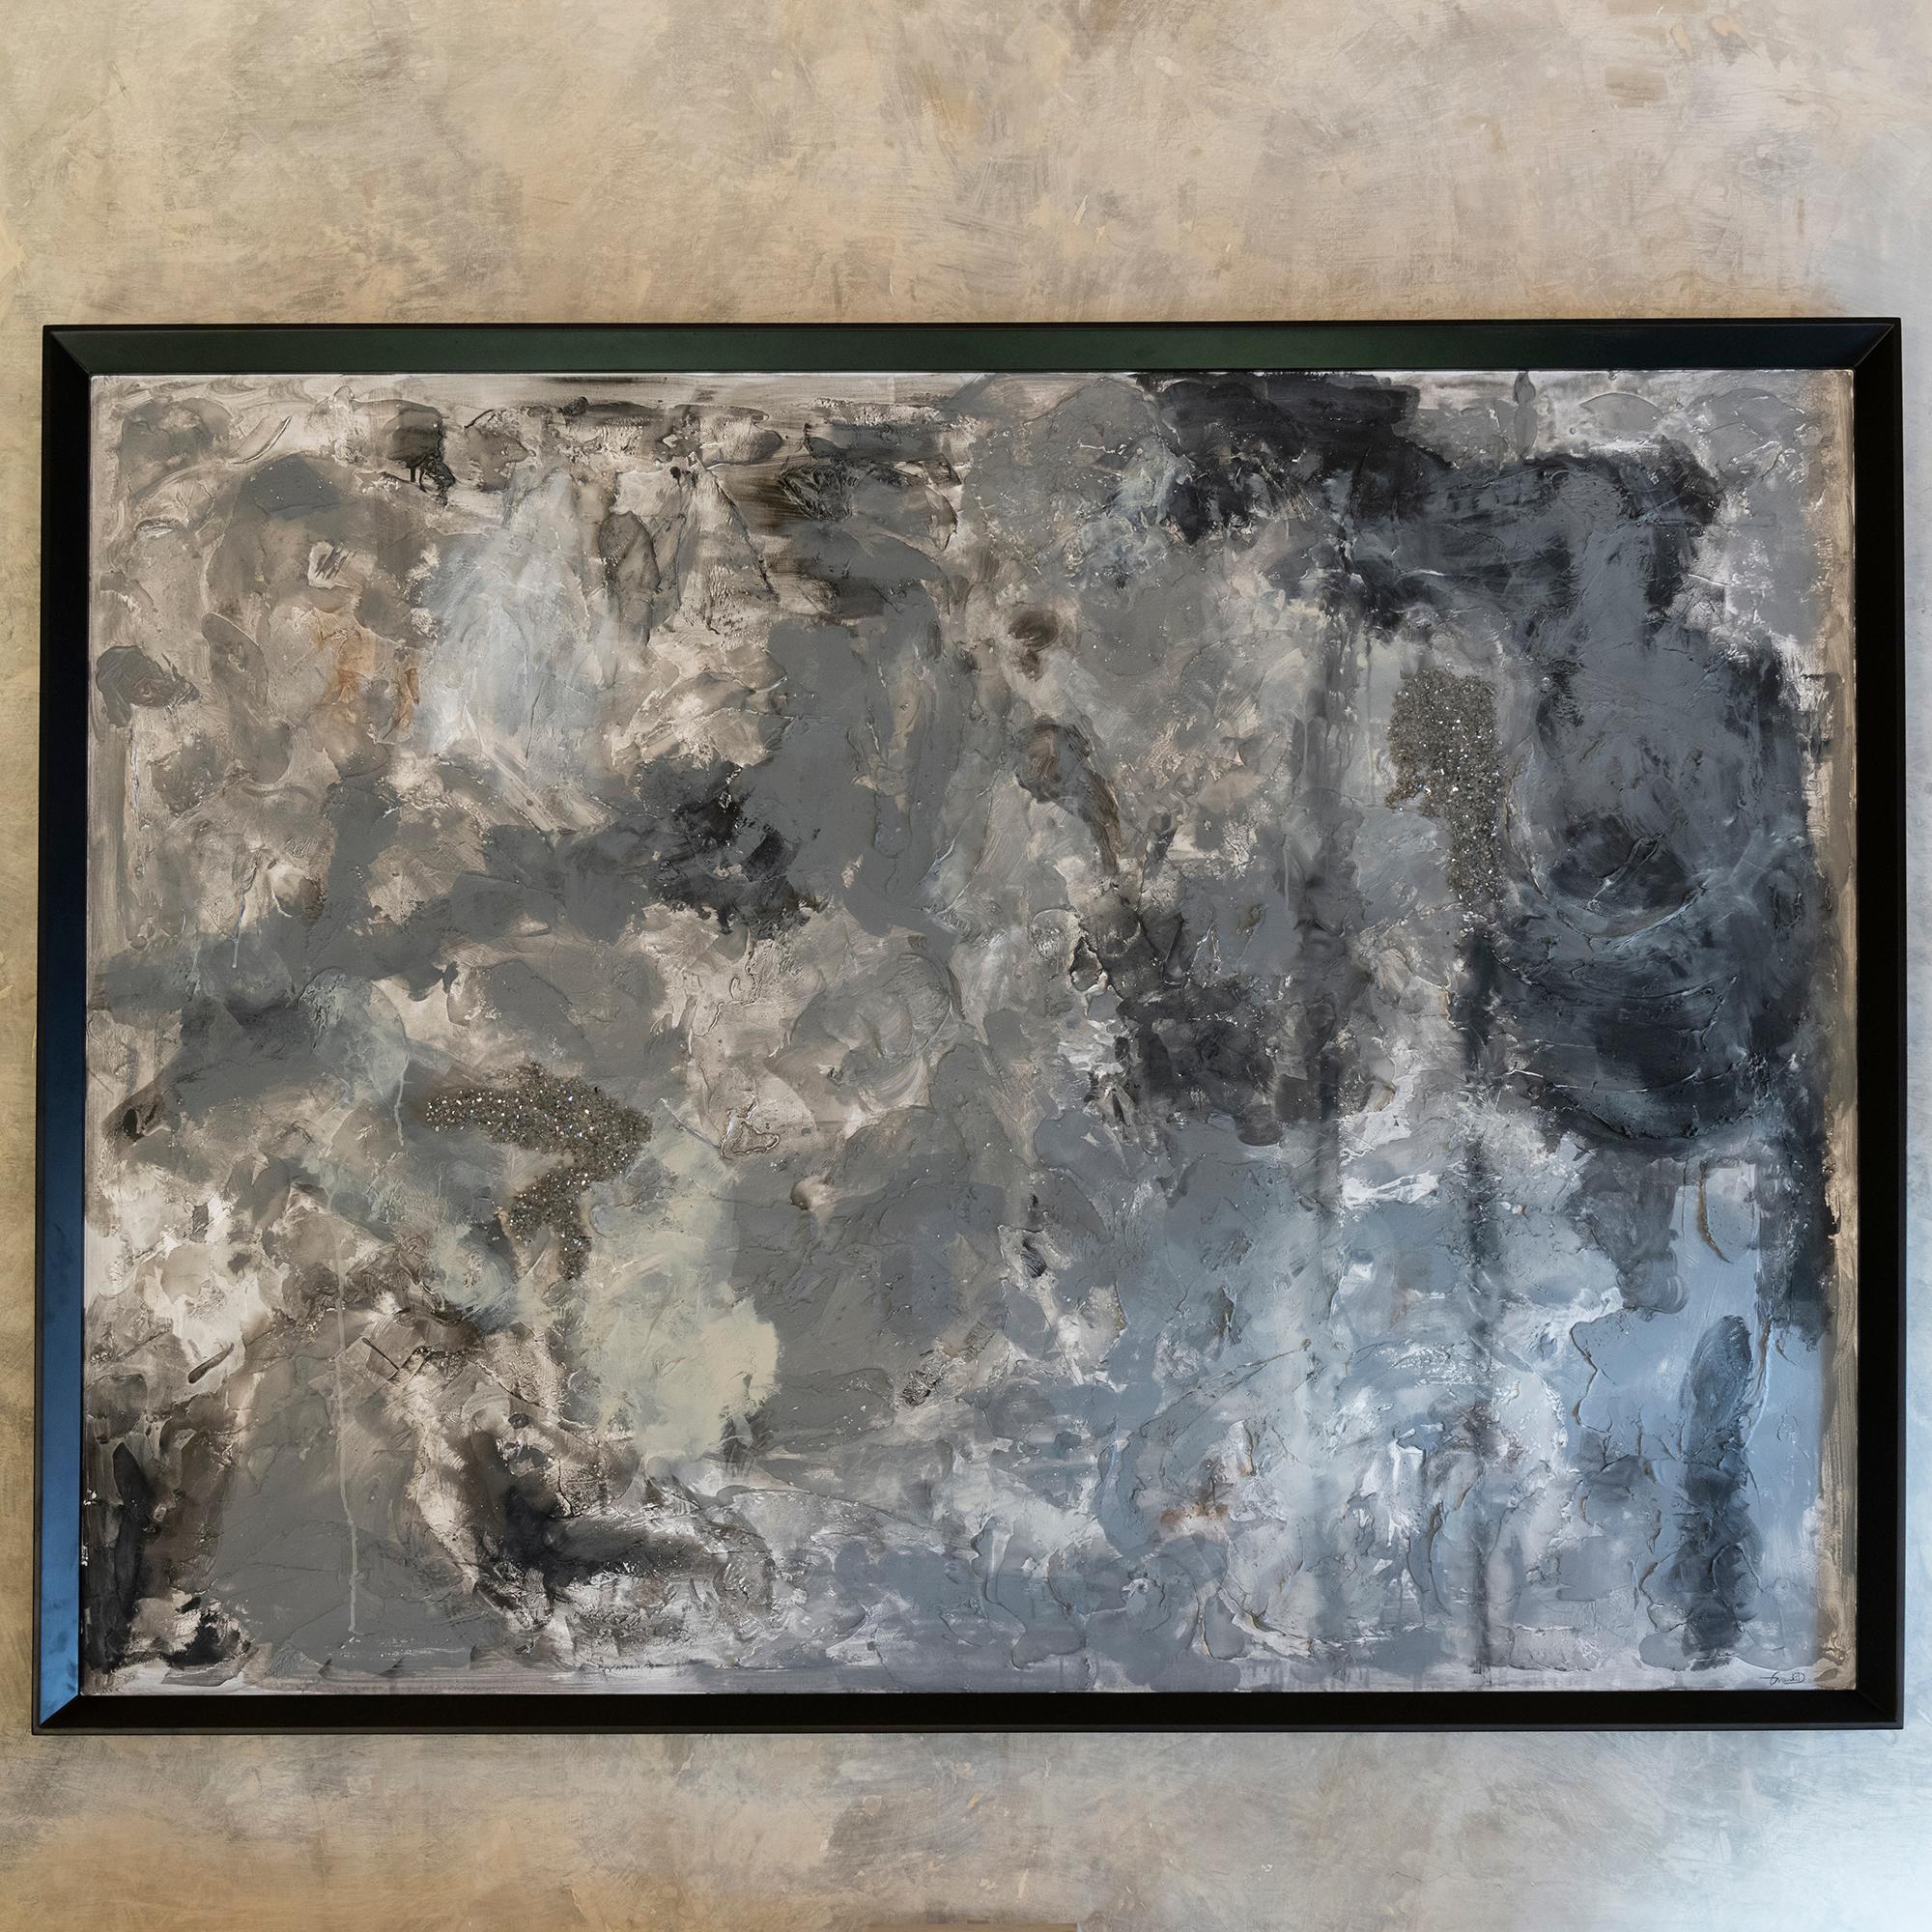 Contemporary abstract painting, acrylics and plaster on canvas, with pyrite details, wood frame, by Guendalina Dorata, Italy 2021.